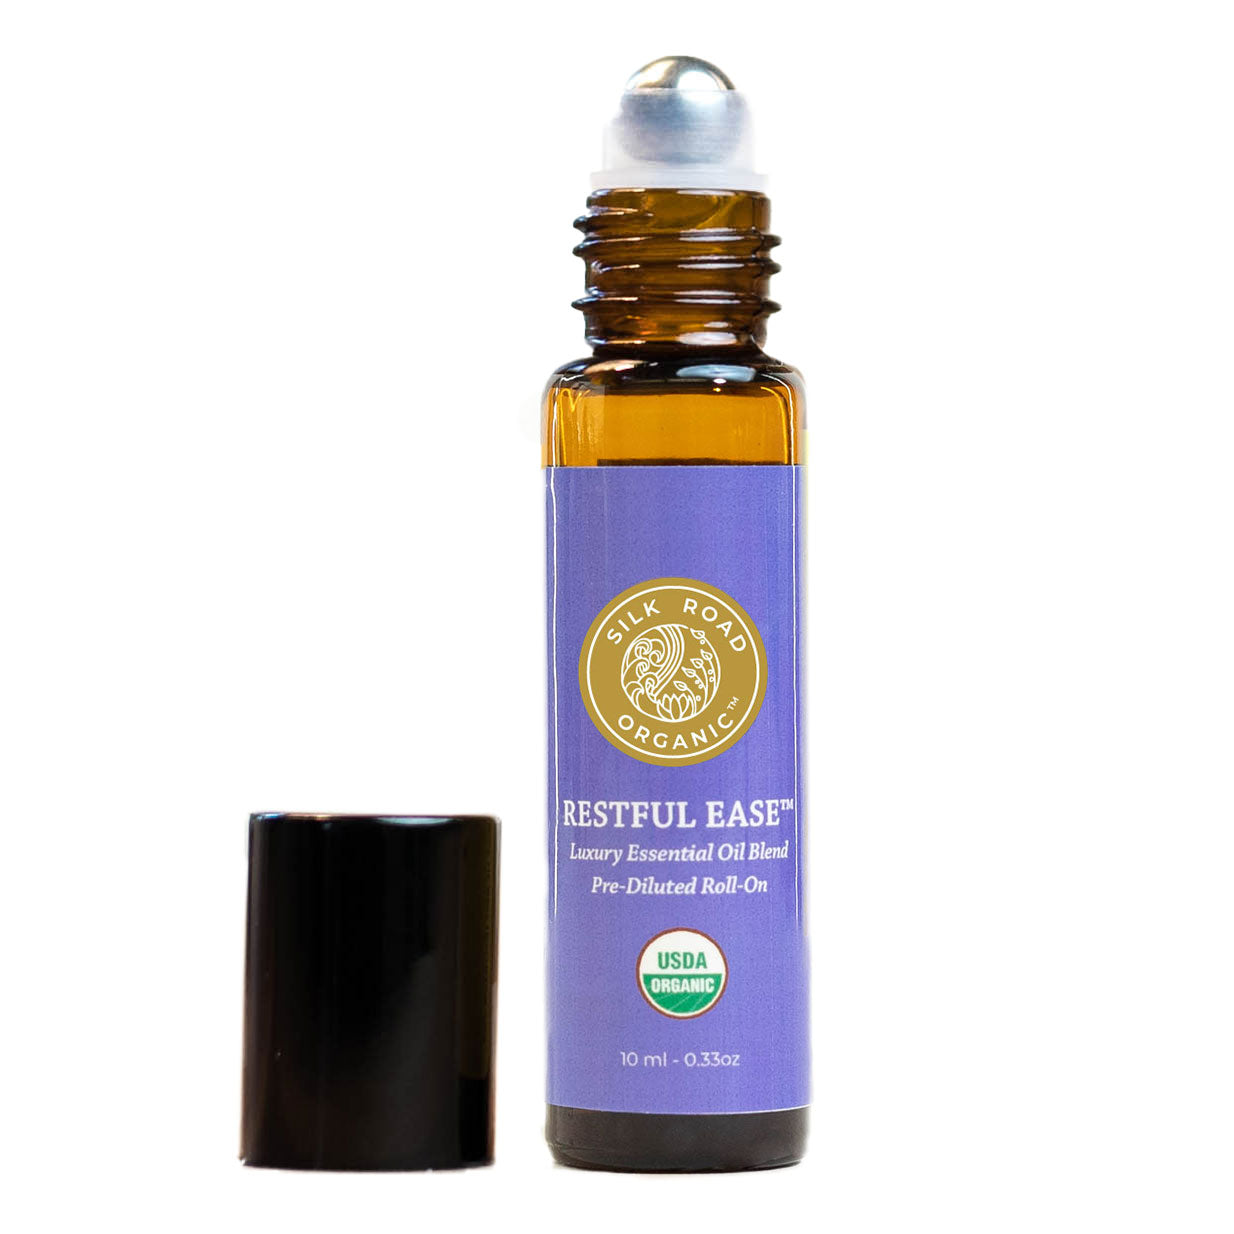 restful ease soothing essential oil roll-on silk road organic